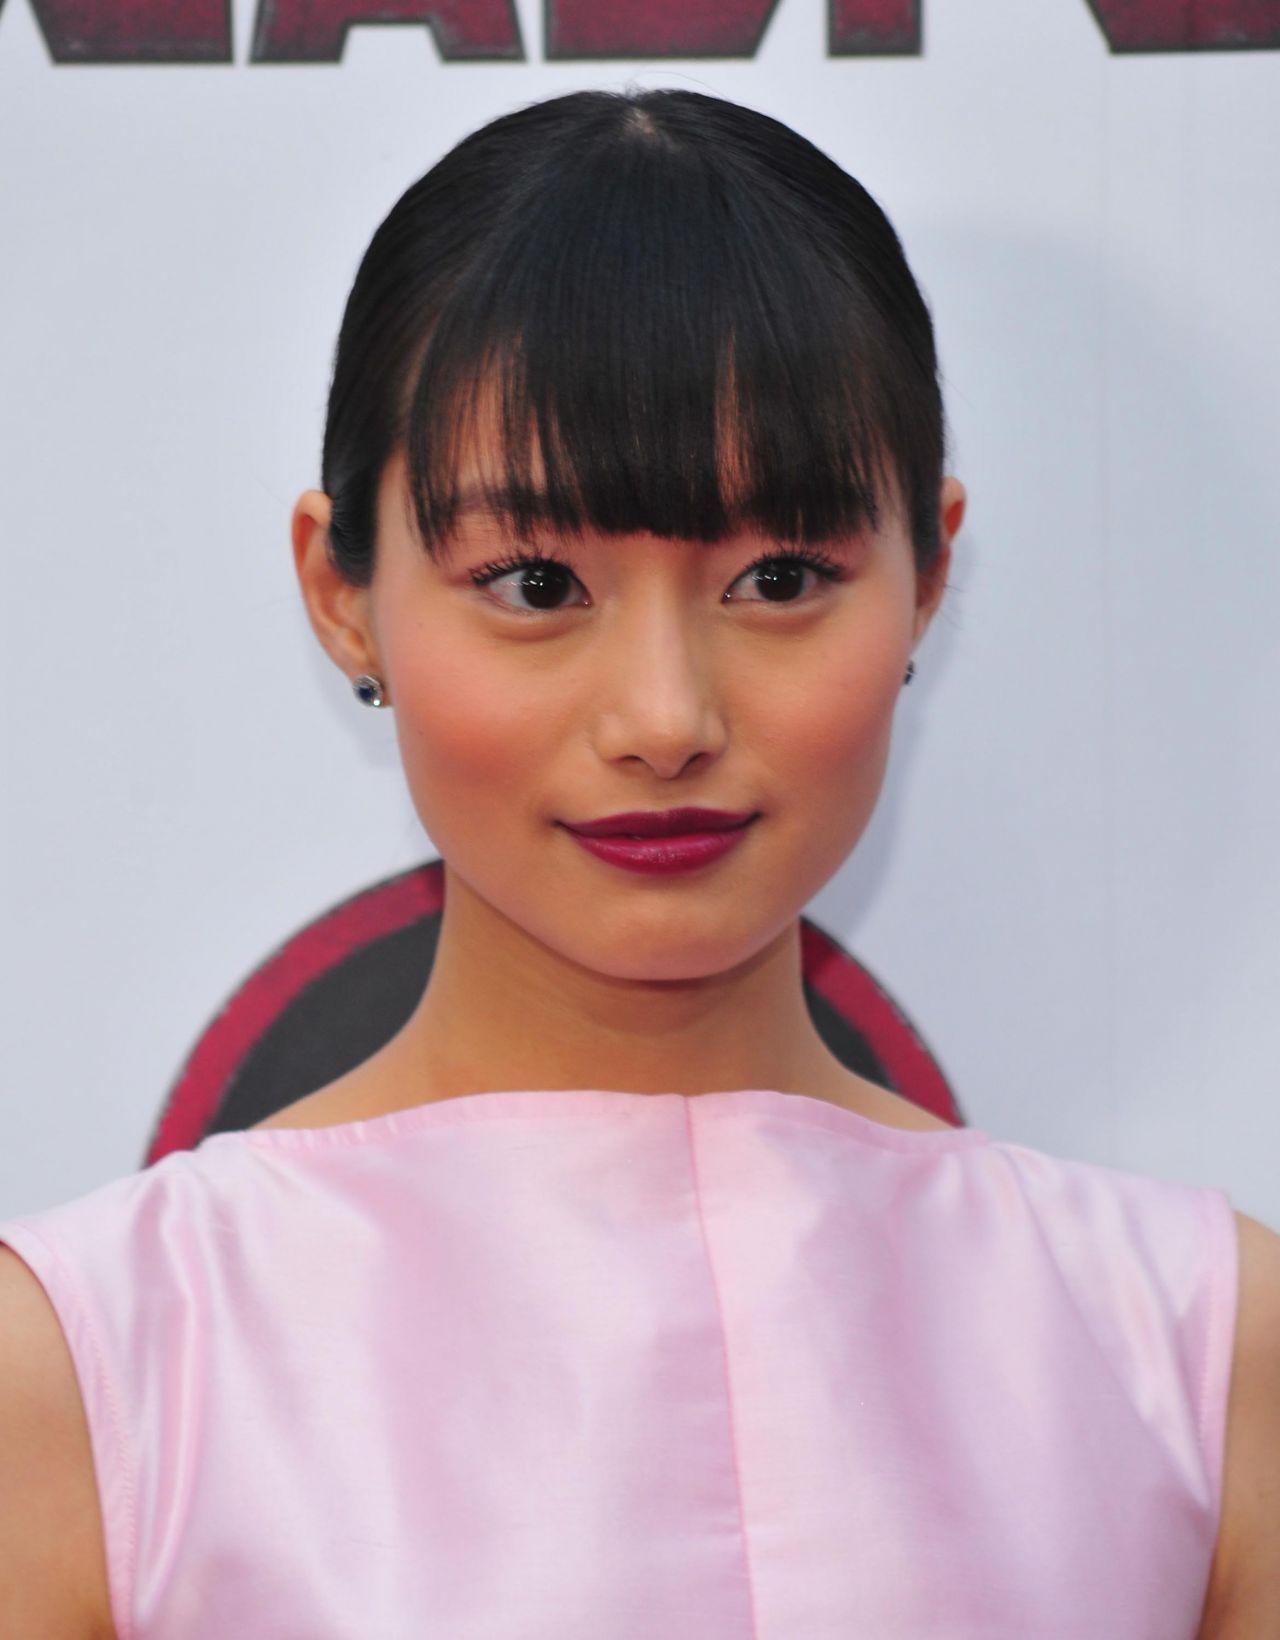 20+ Hot Pictures Of Yukio a.k.a Shiori Kutsuna From Deadpool 2 With Interesting Facts About Her 352